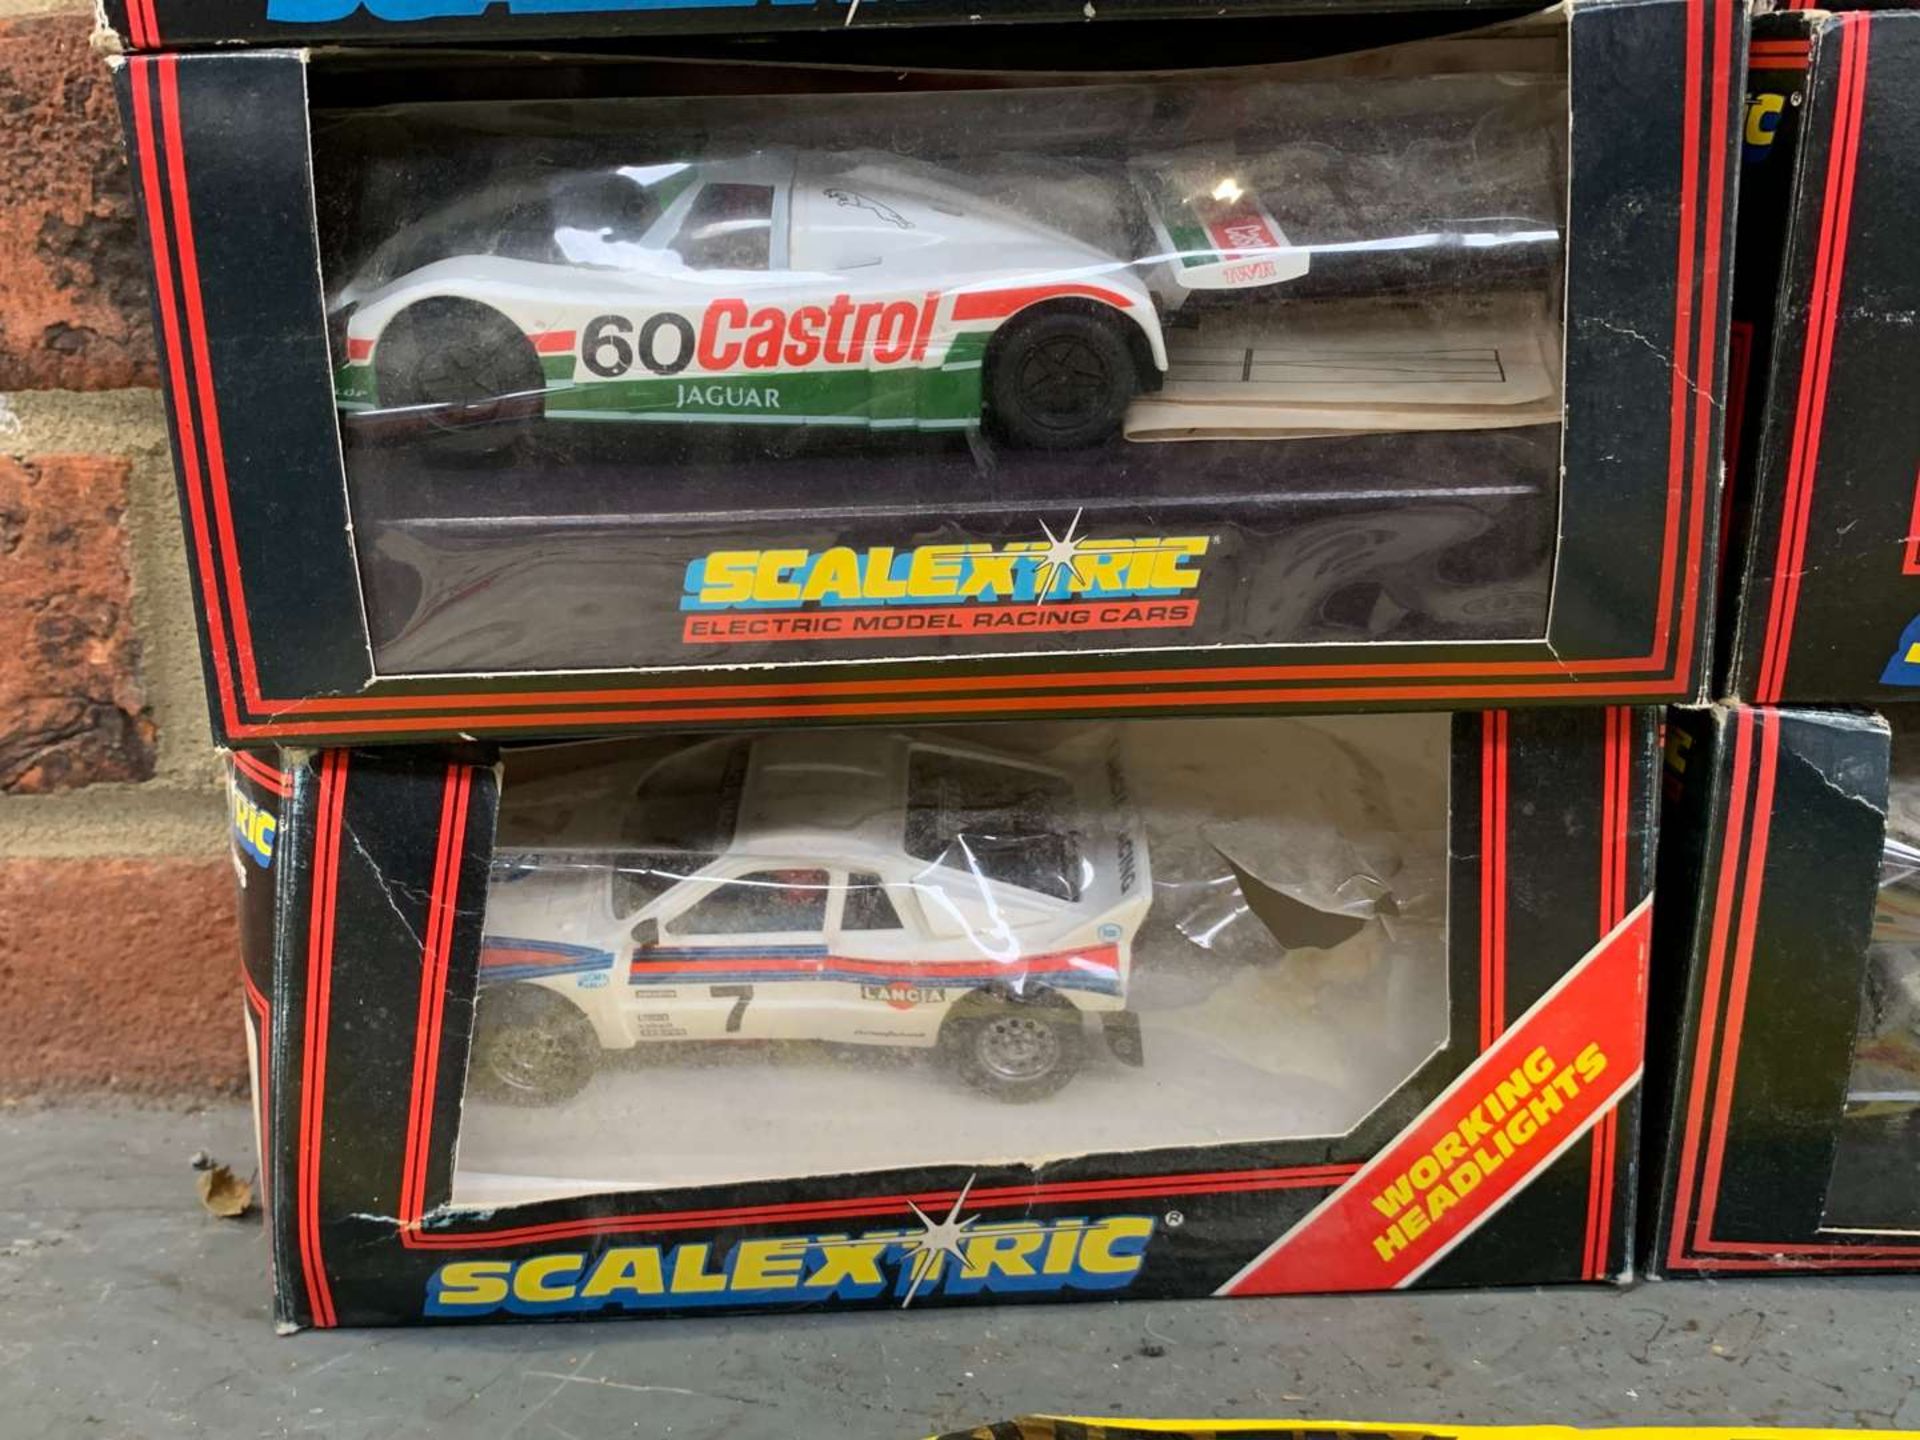 7 Scalextric Model Cars &amp; Airfix Kits - Image 4 of 6